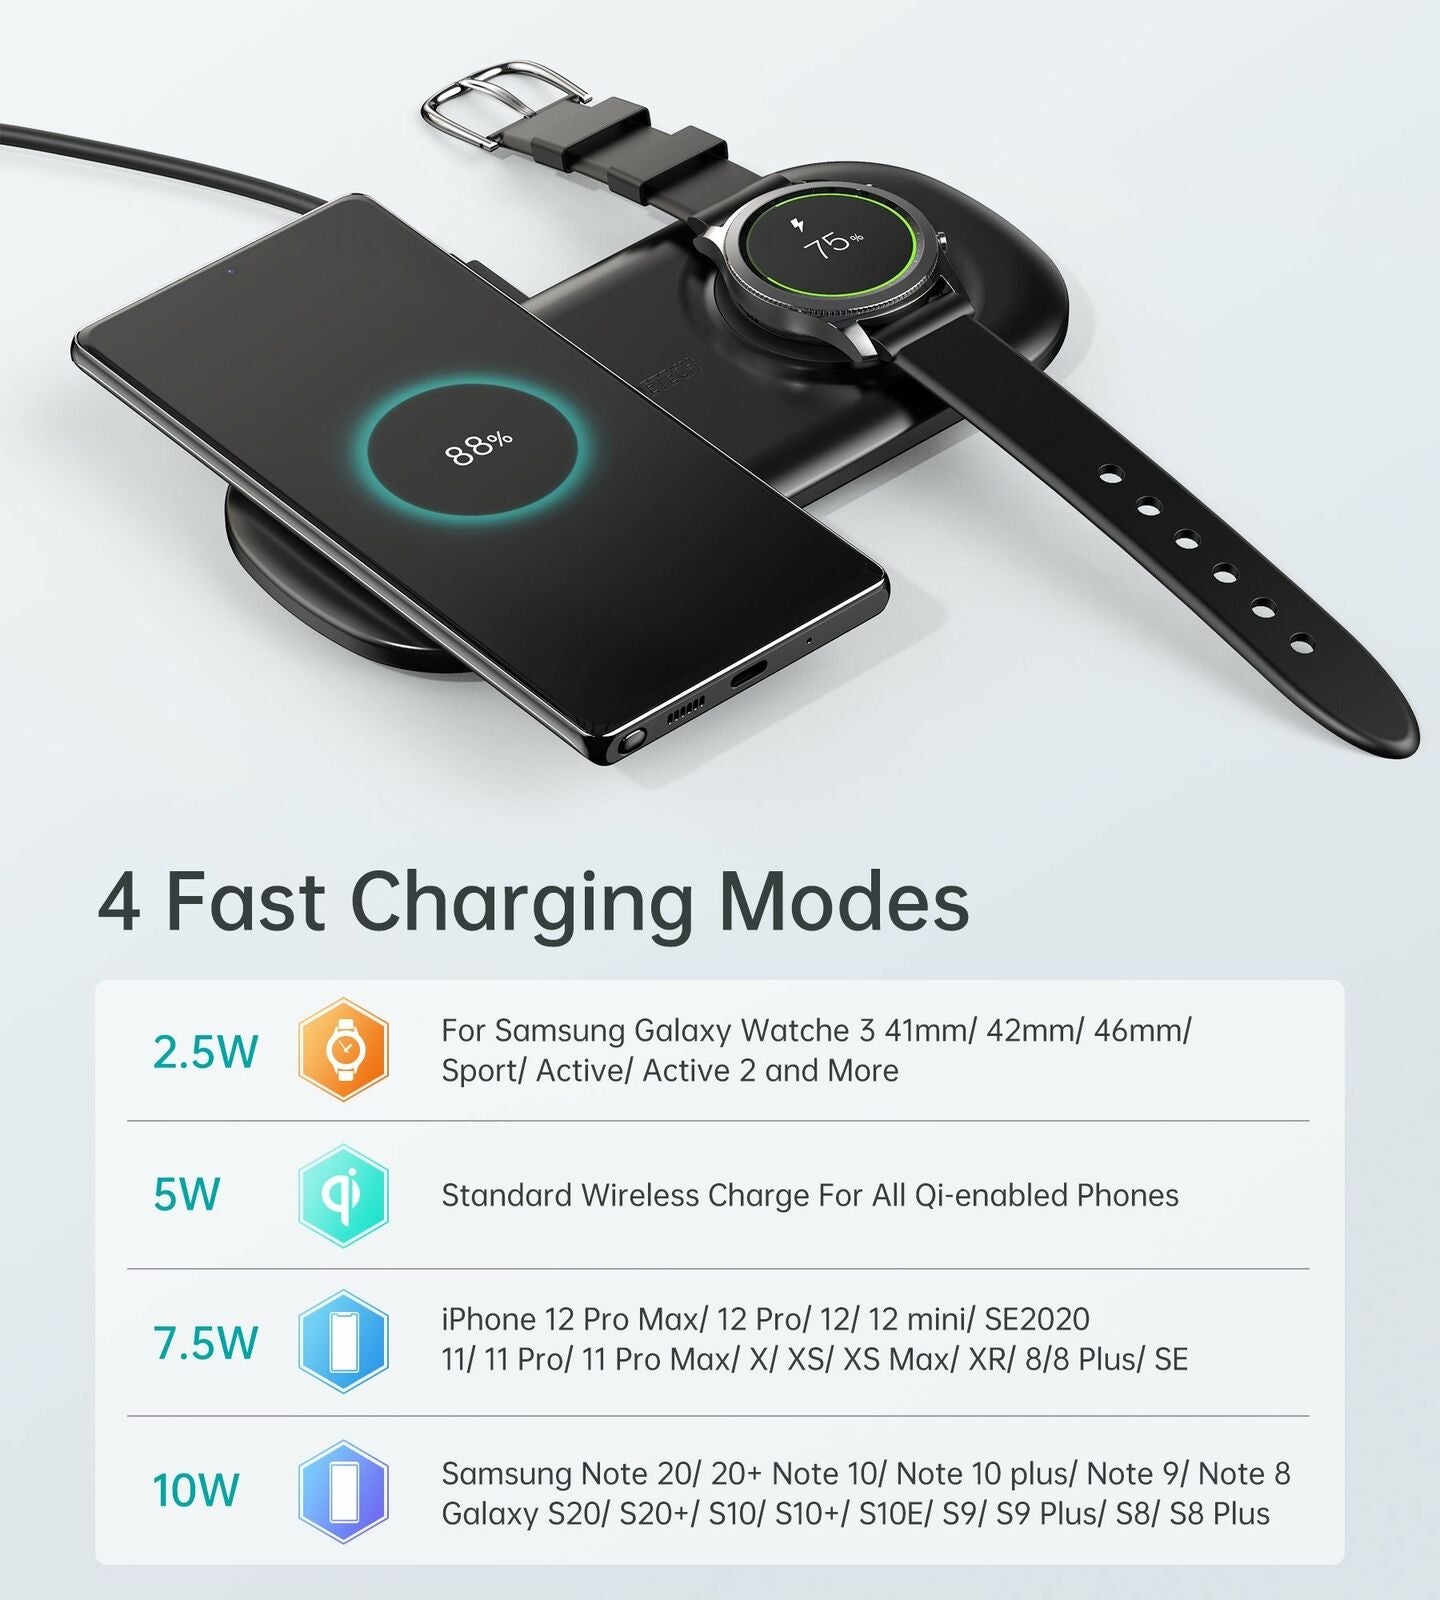 Choetech T570-S in 1 Wireless Charger